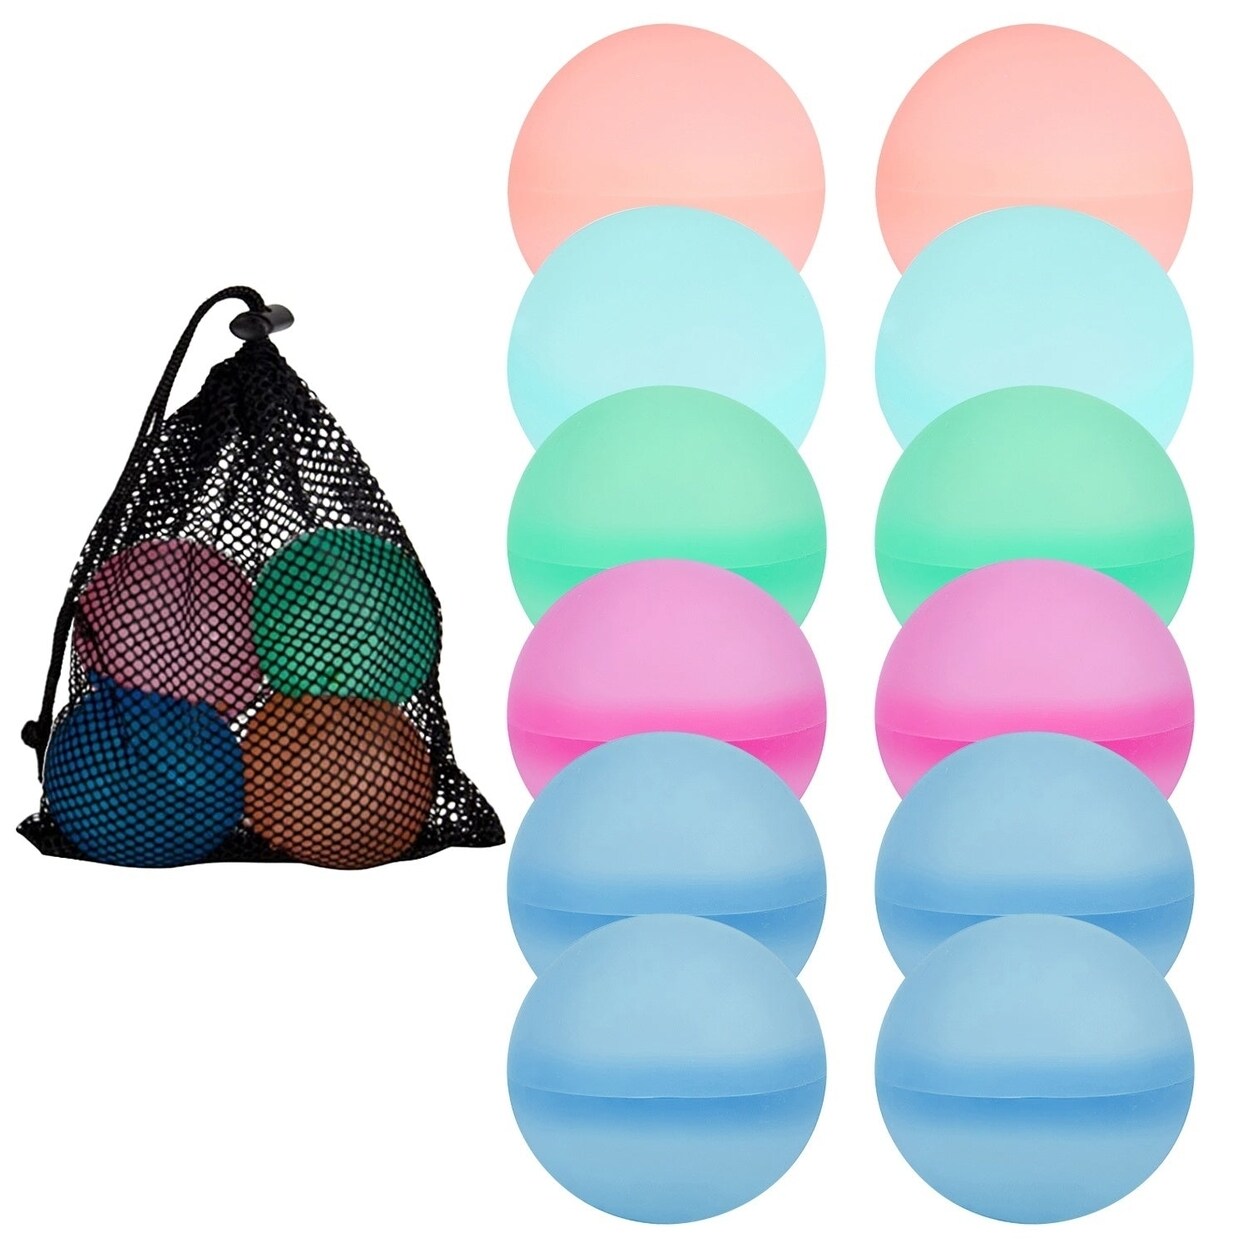 SKUSHOPS 12Pcs Reusable Water Balloons Refillable Silicond Water Bombs for Water Games Water Balls for Summer Fun